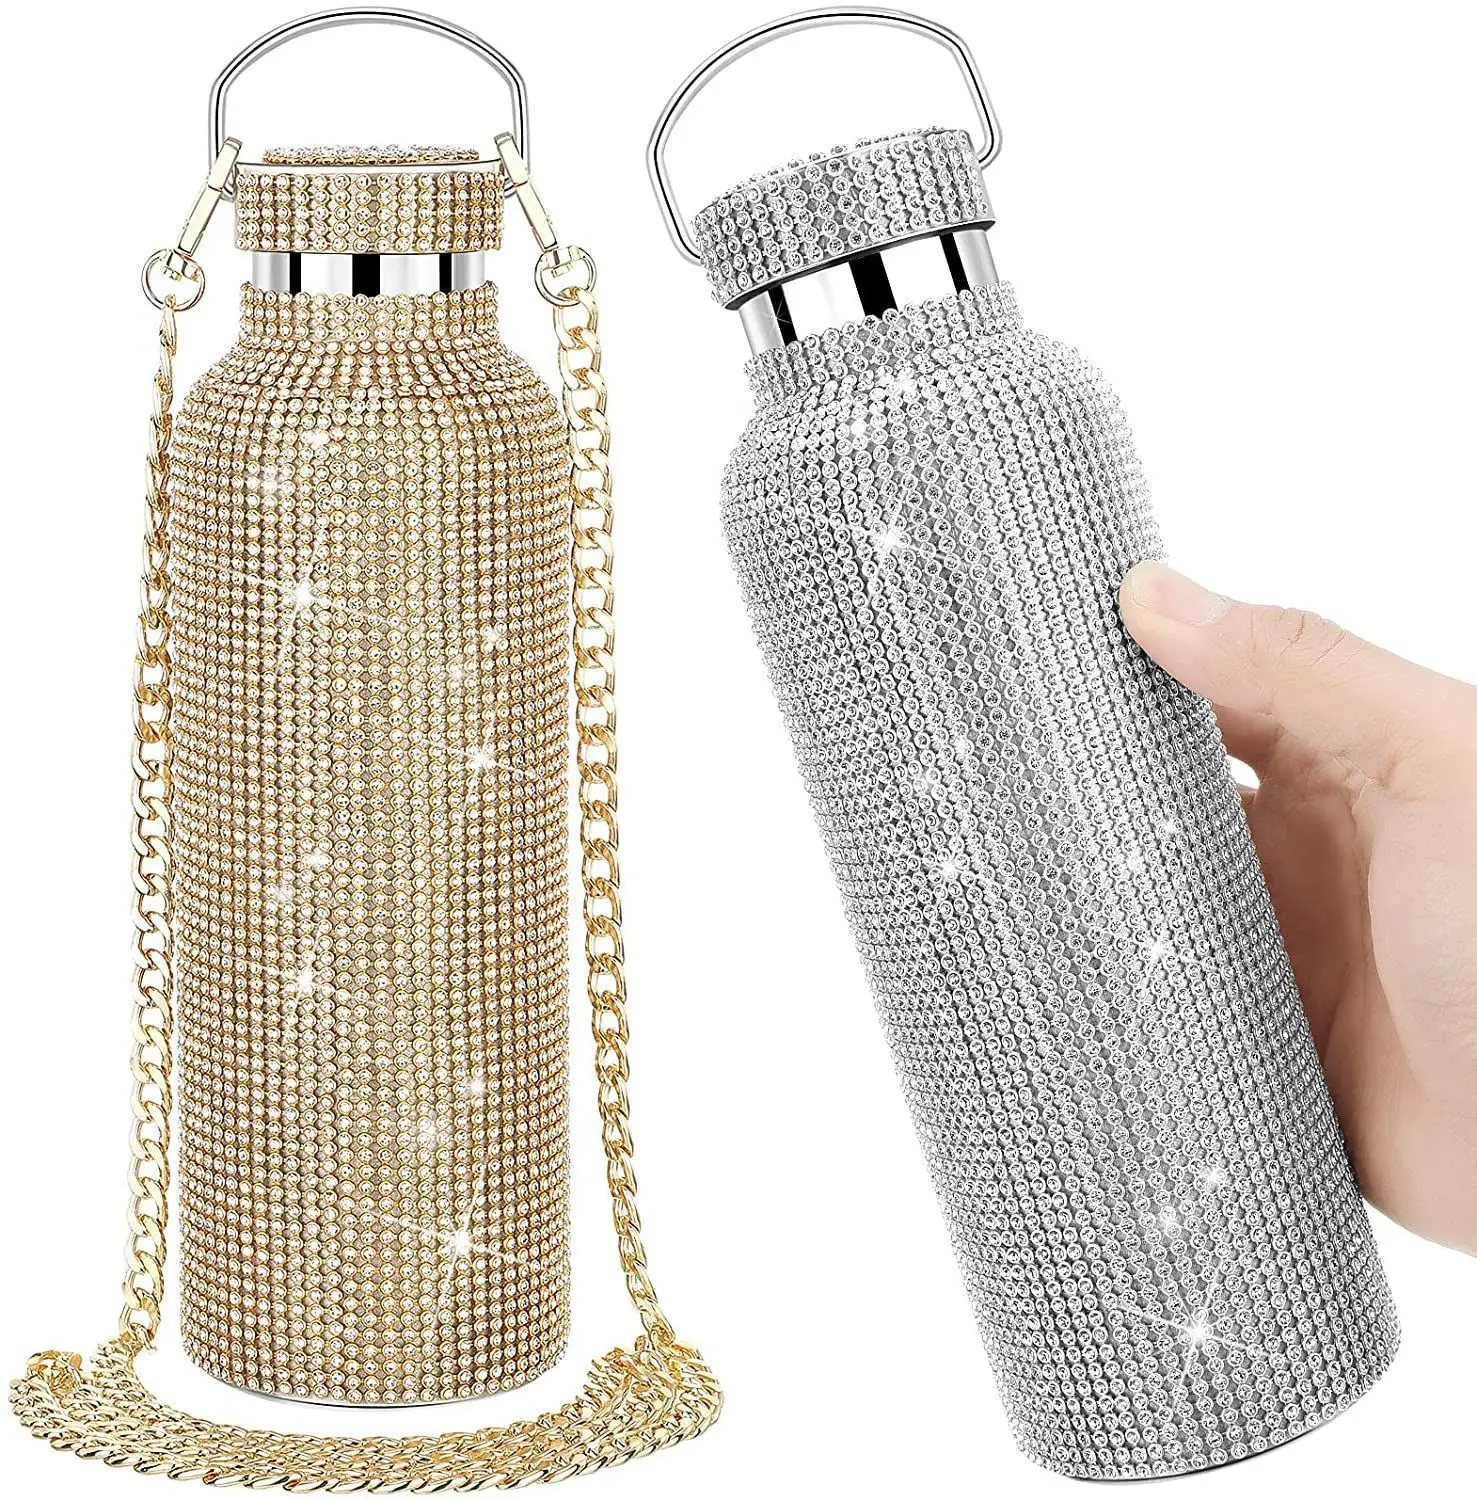 

500ml/750ml Diamond Thermos Bottle Insulated Rhinestone Vacuum Cup Stainless Steel Flask Bottle Drinking Kettle Outdoorportable